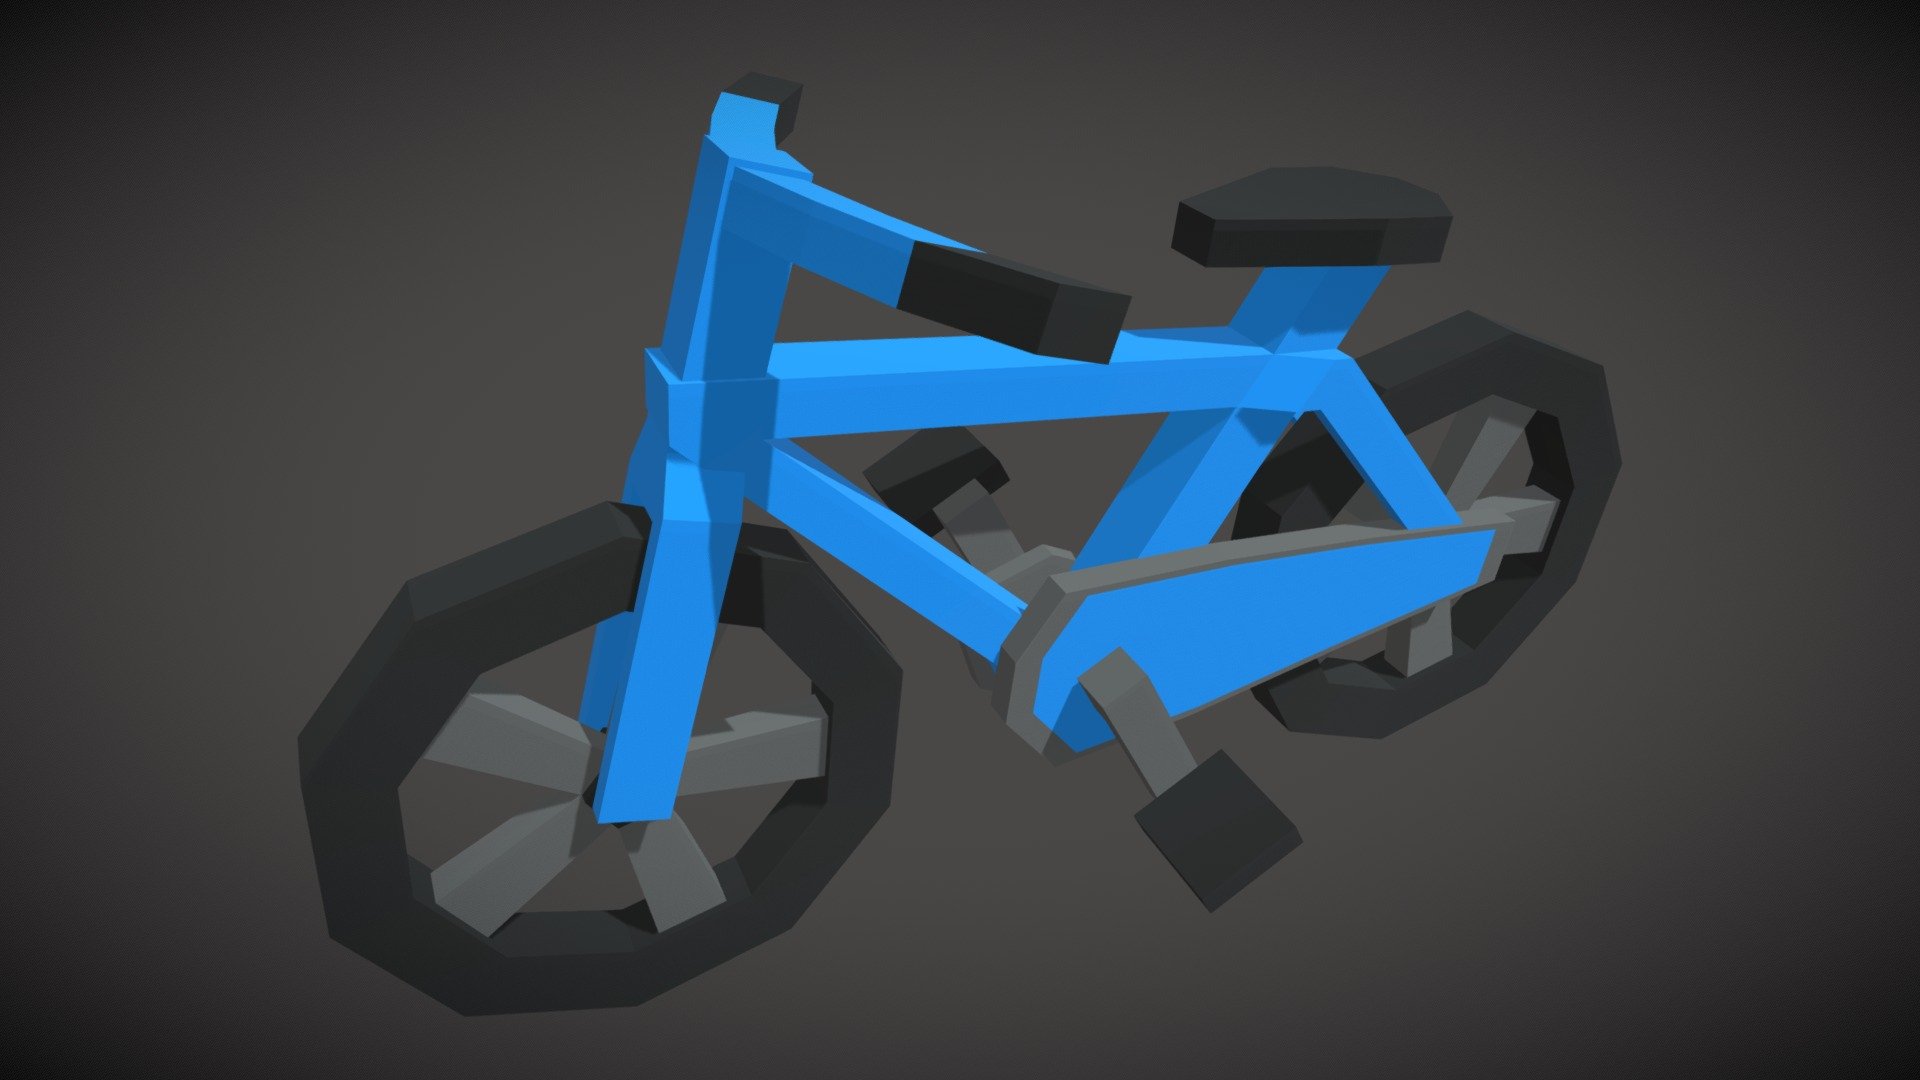 Today was skating day, so I thought i just model some cool things you need for skating. This is a simple lowpoly bicycle for your next game or video 3d model